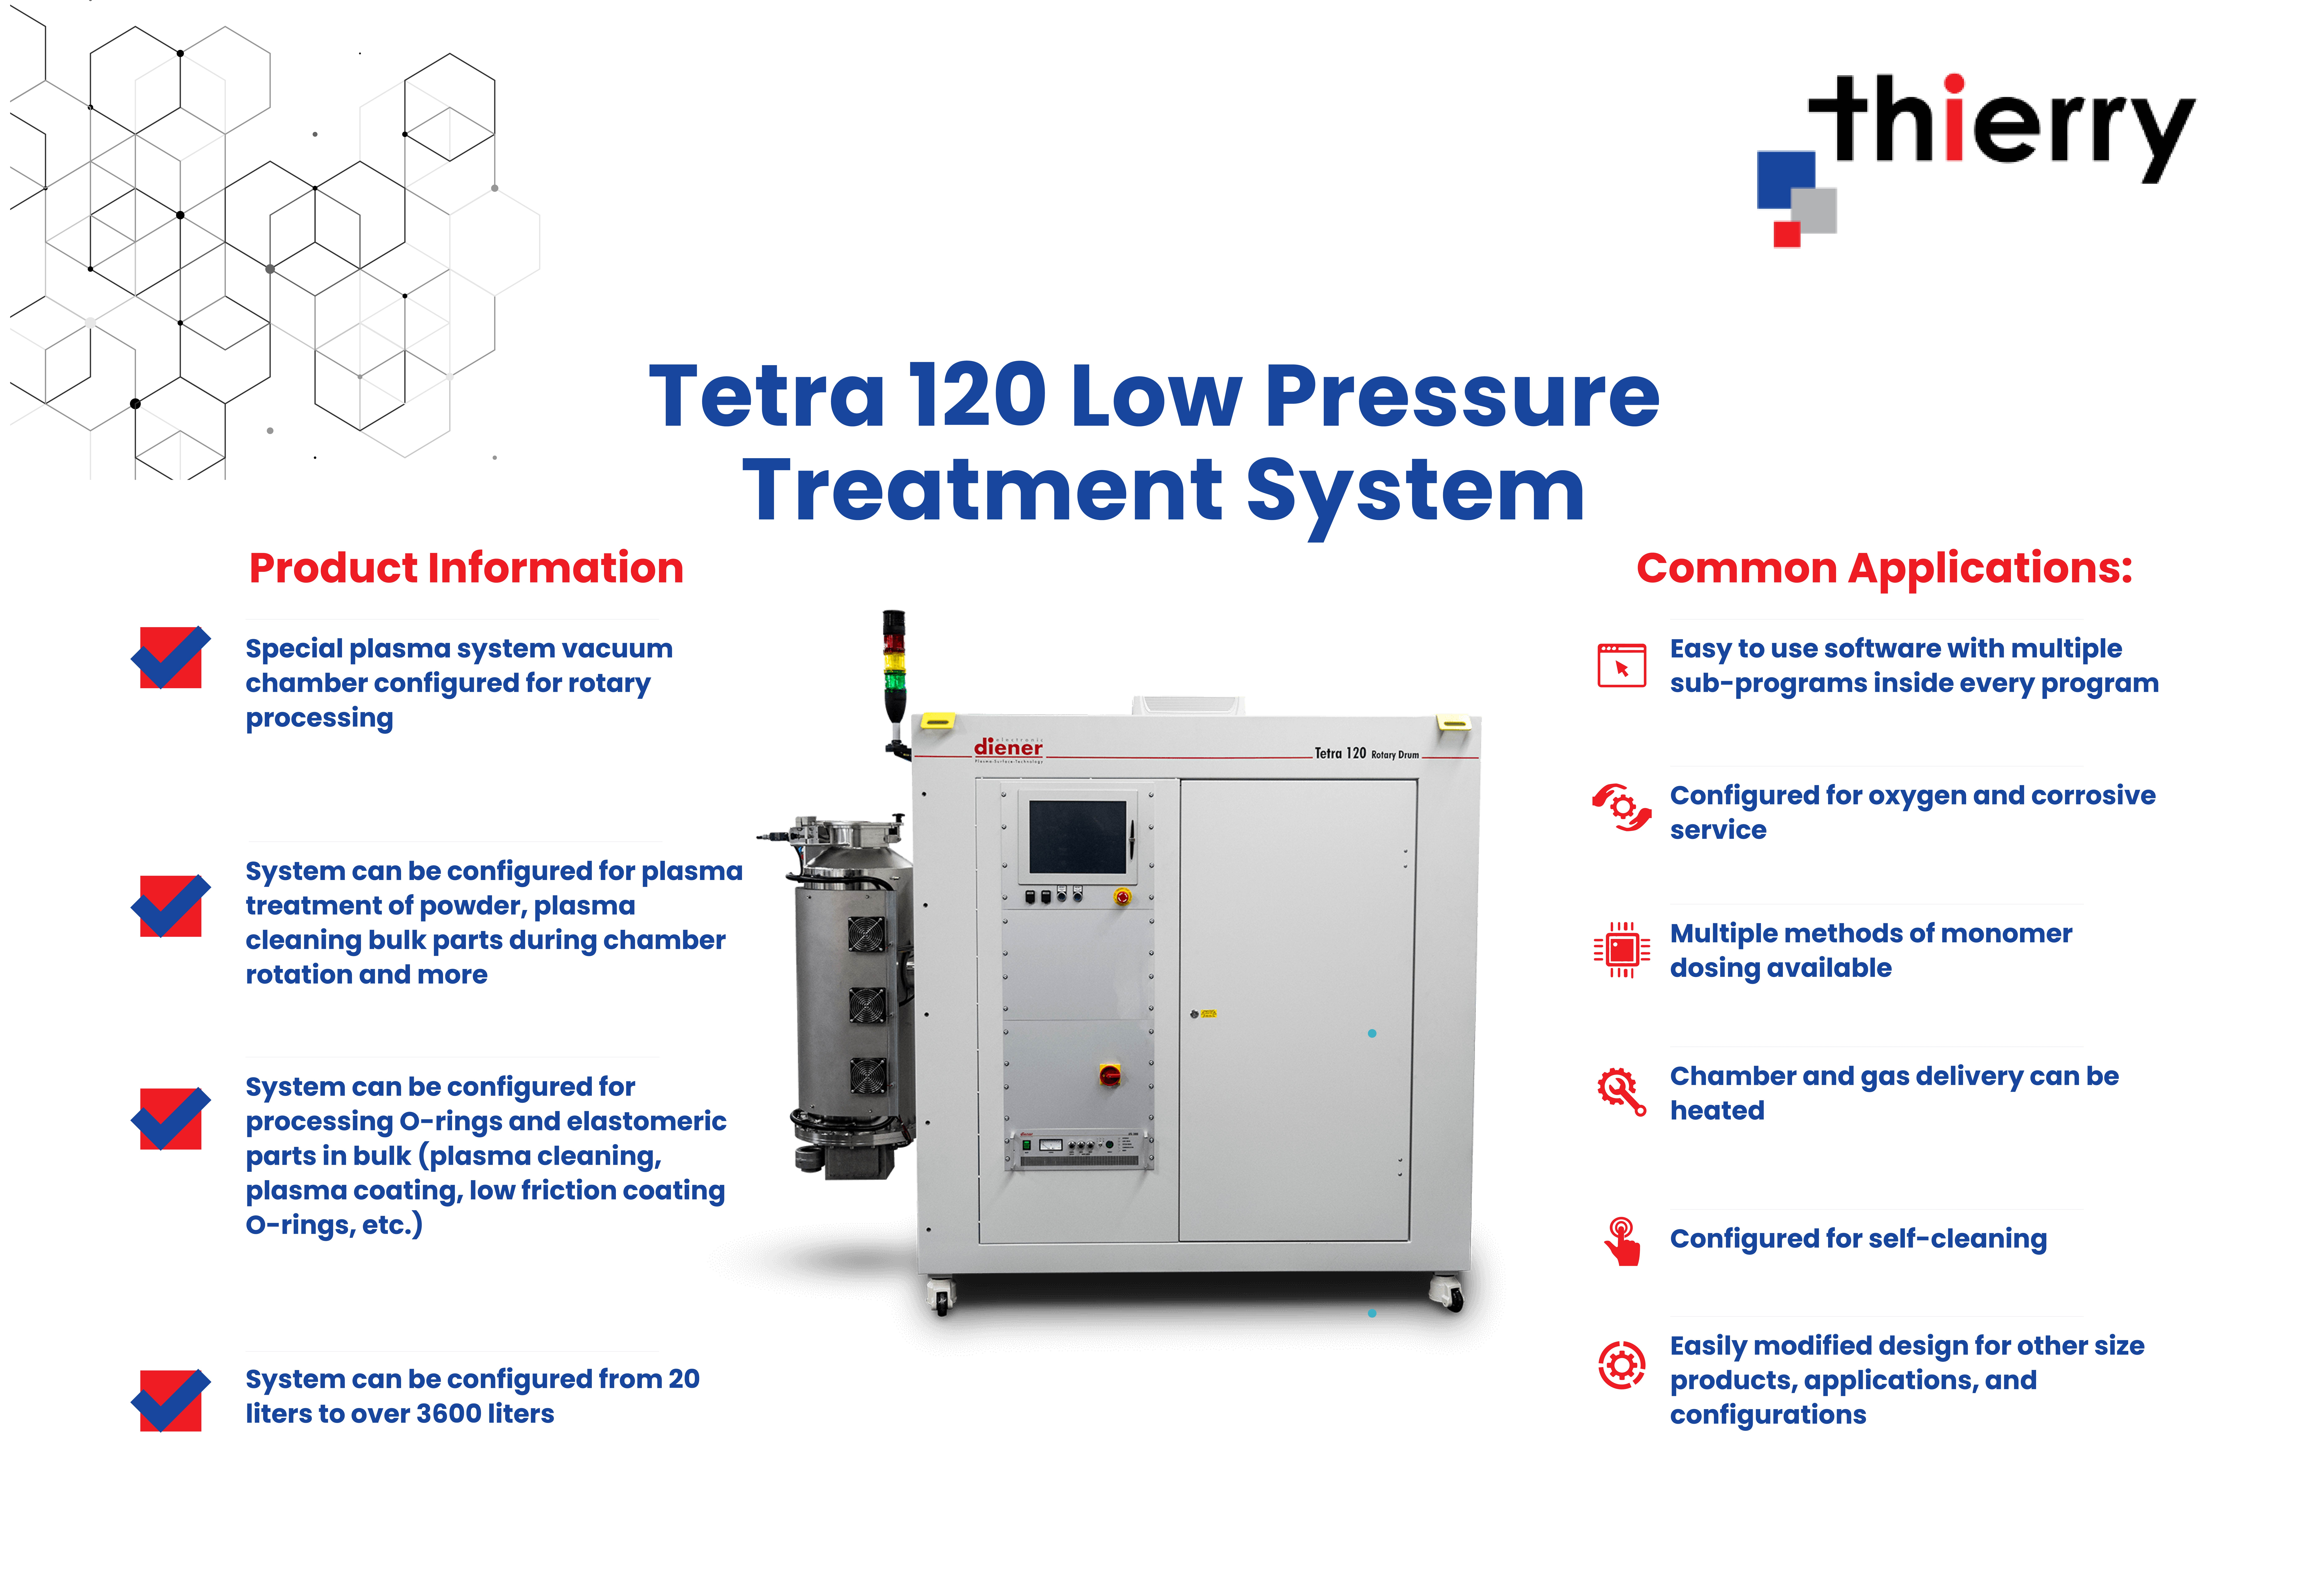 Thierry_Corp_Tetra_120_Low_Pressure_Treatment_System